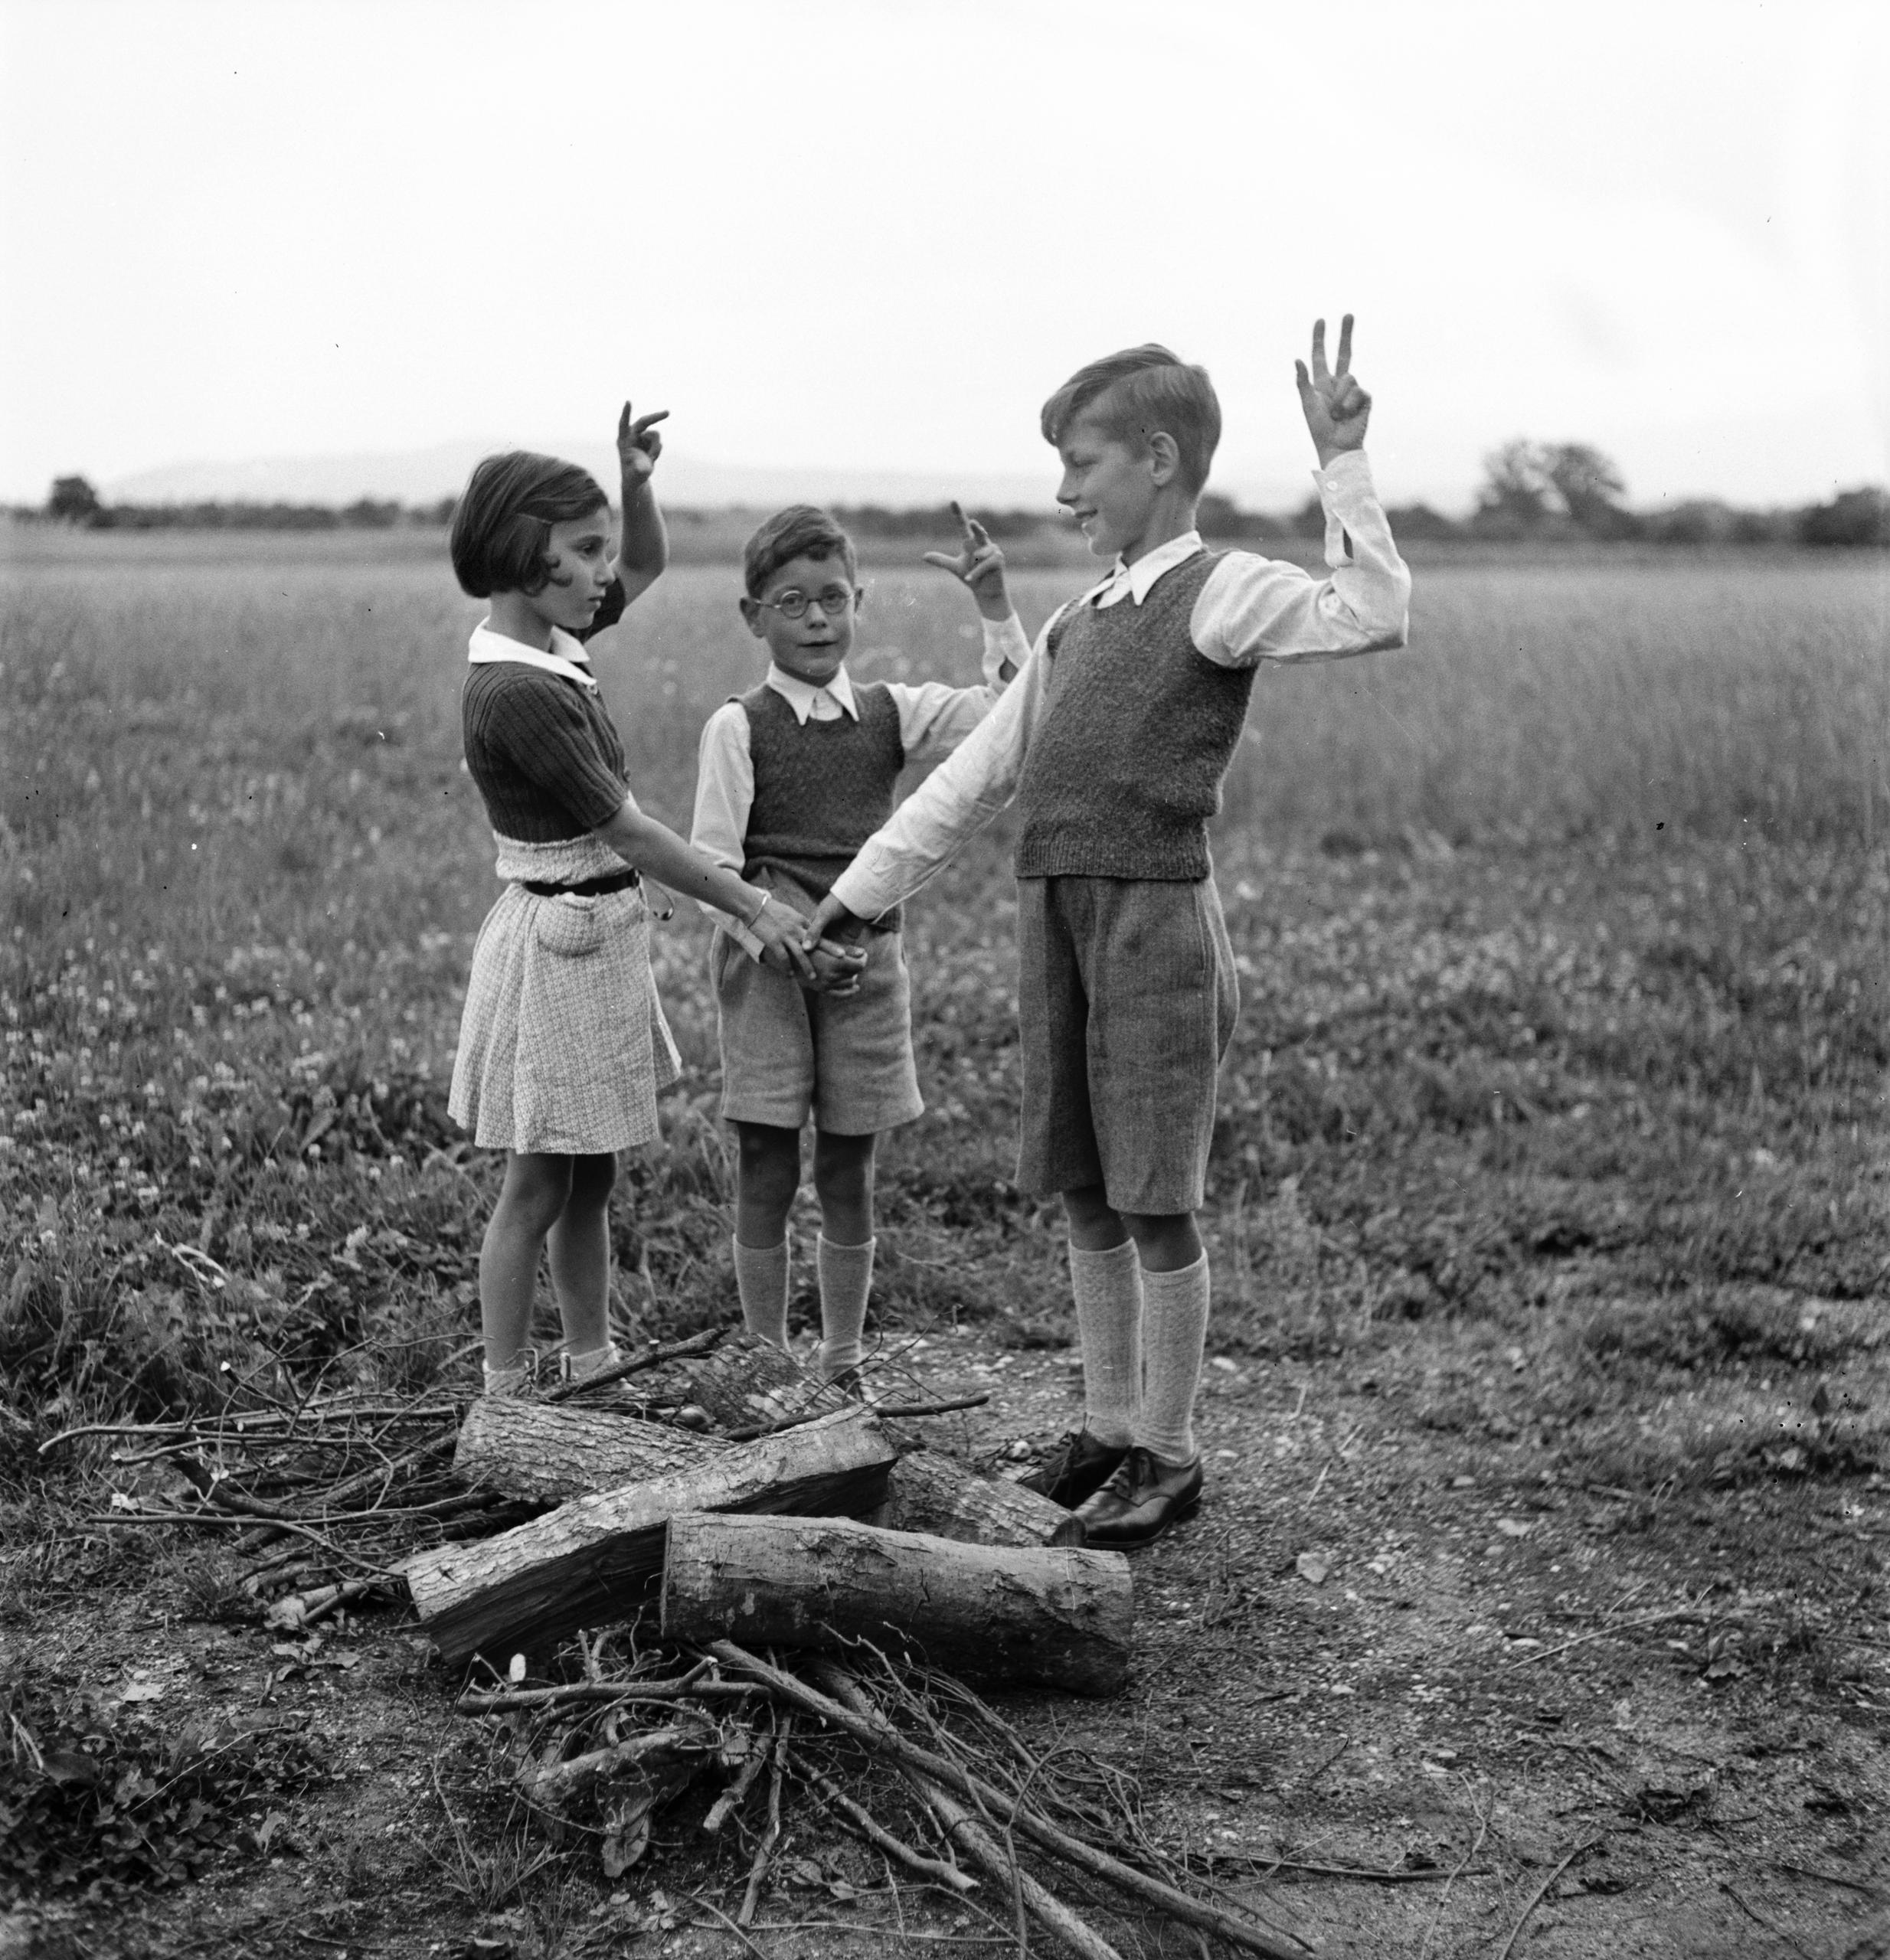 Three children standing by wooden logs making a vow.